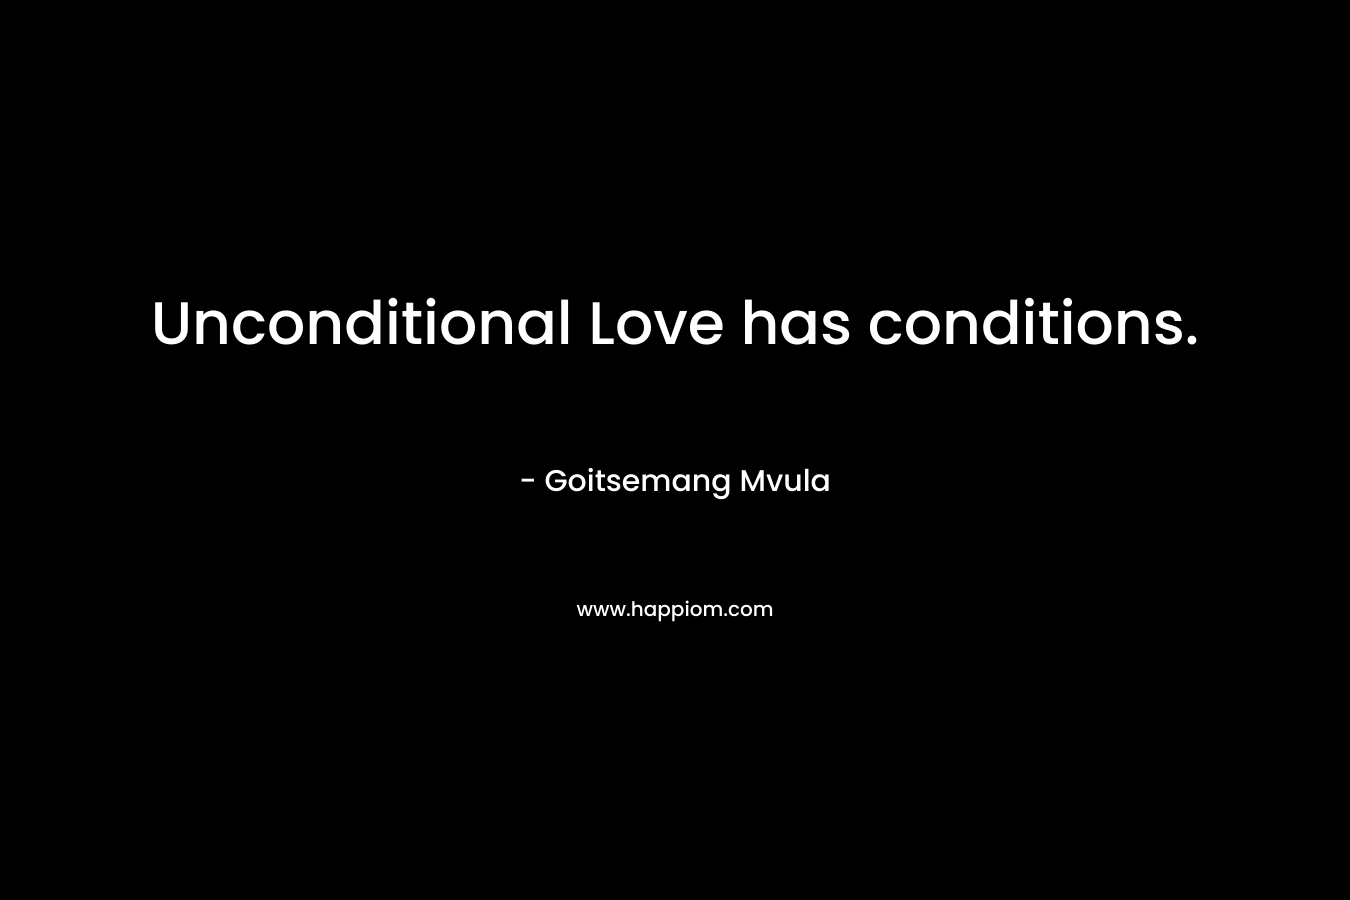 Unconditional Love has conditions.